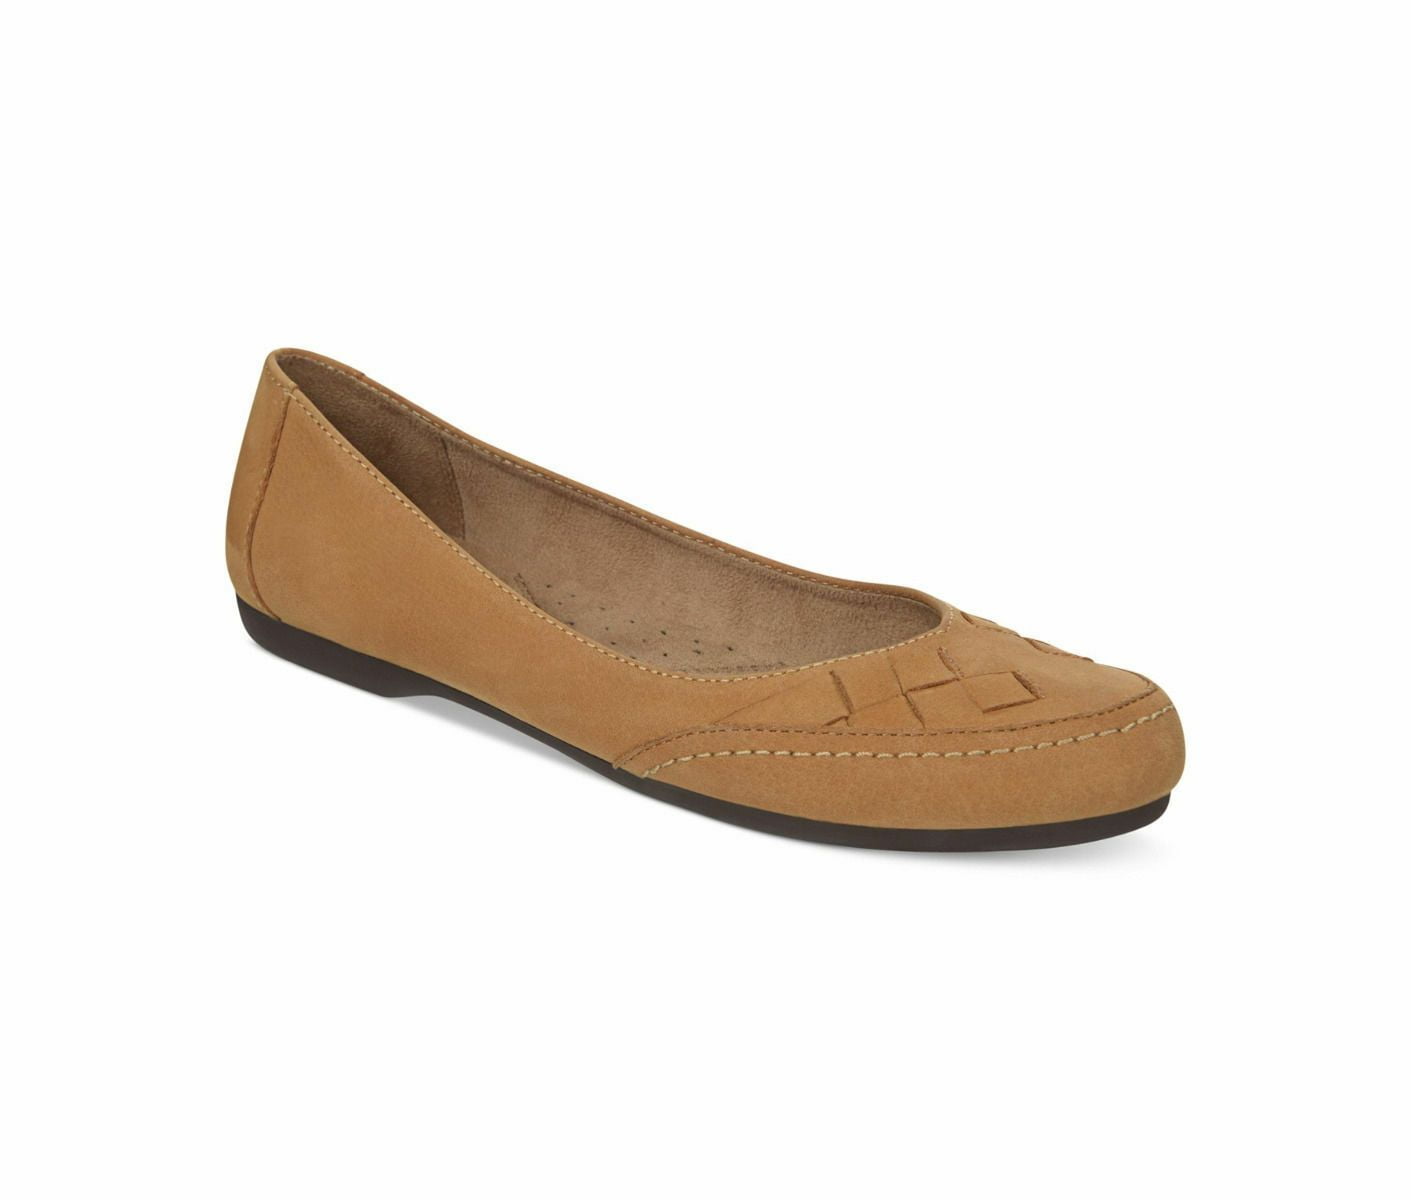 camel leather flats